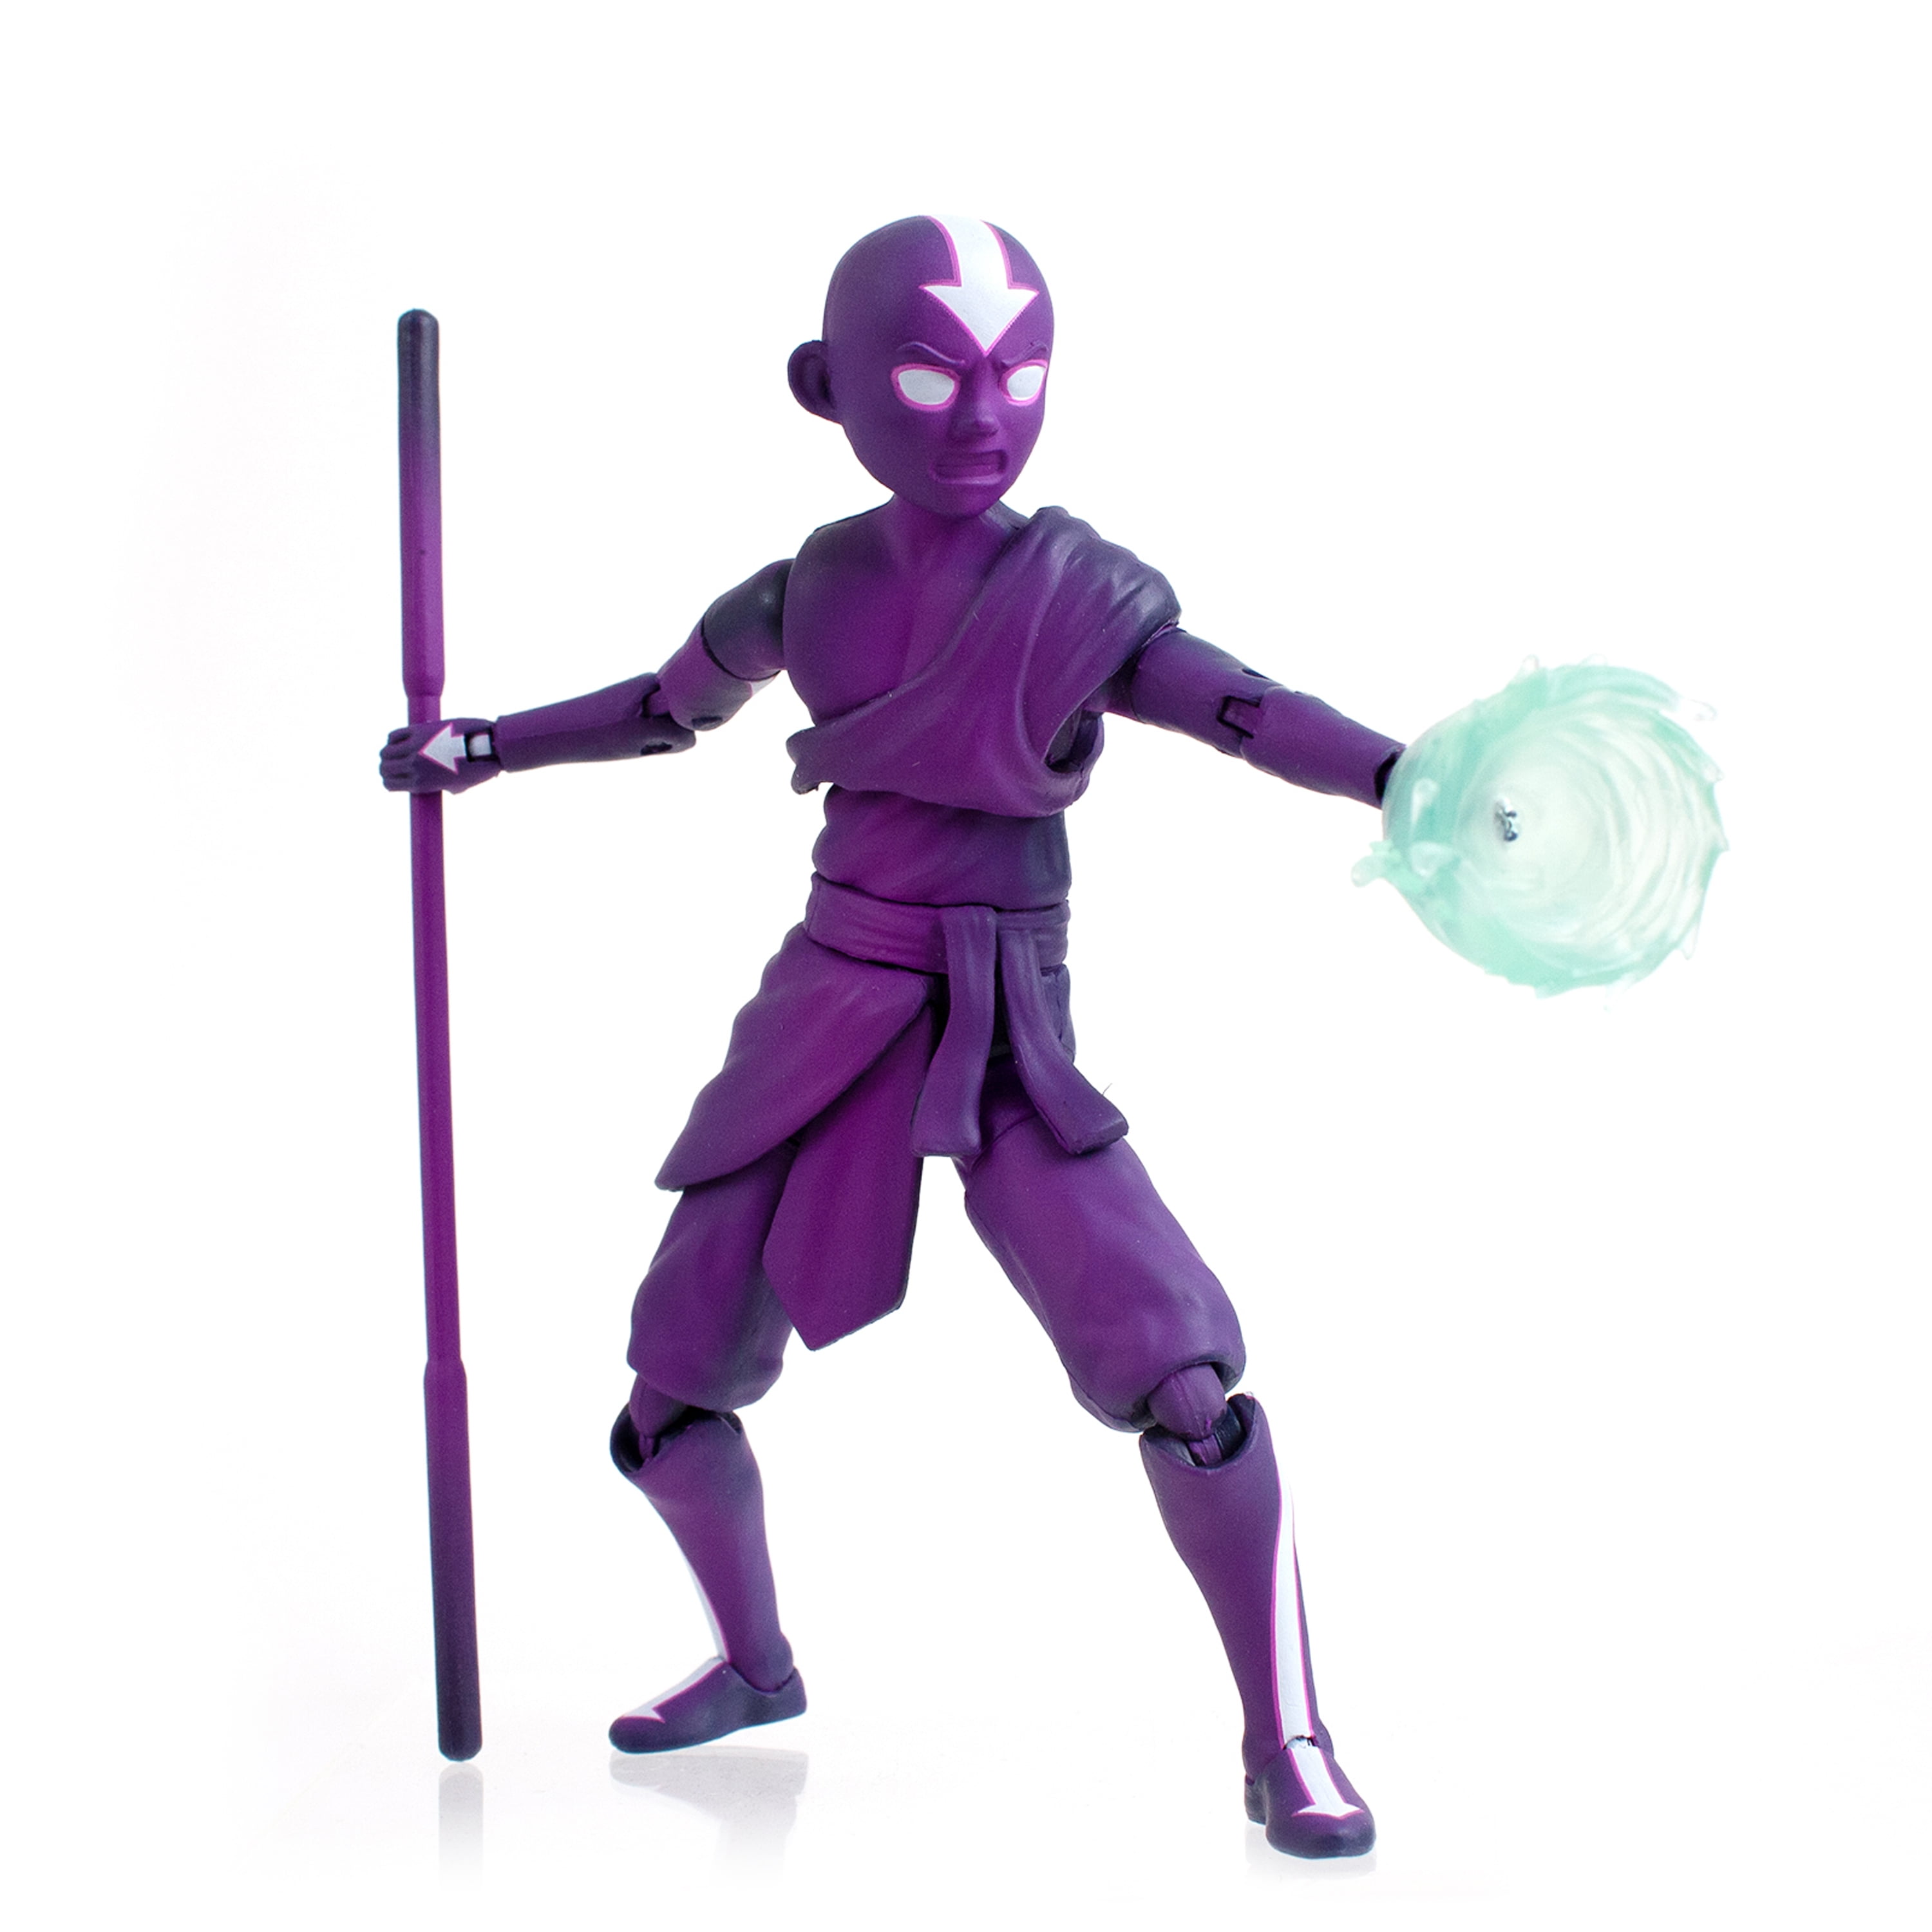 Charming cosmic figures figurine with small dish